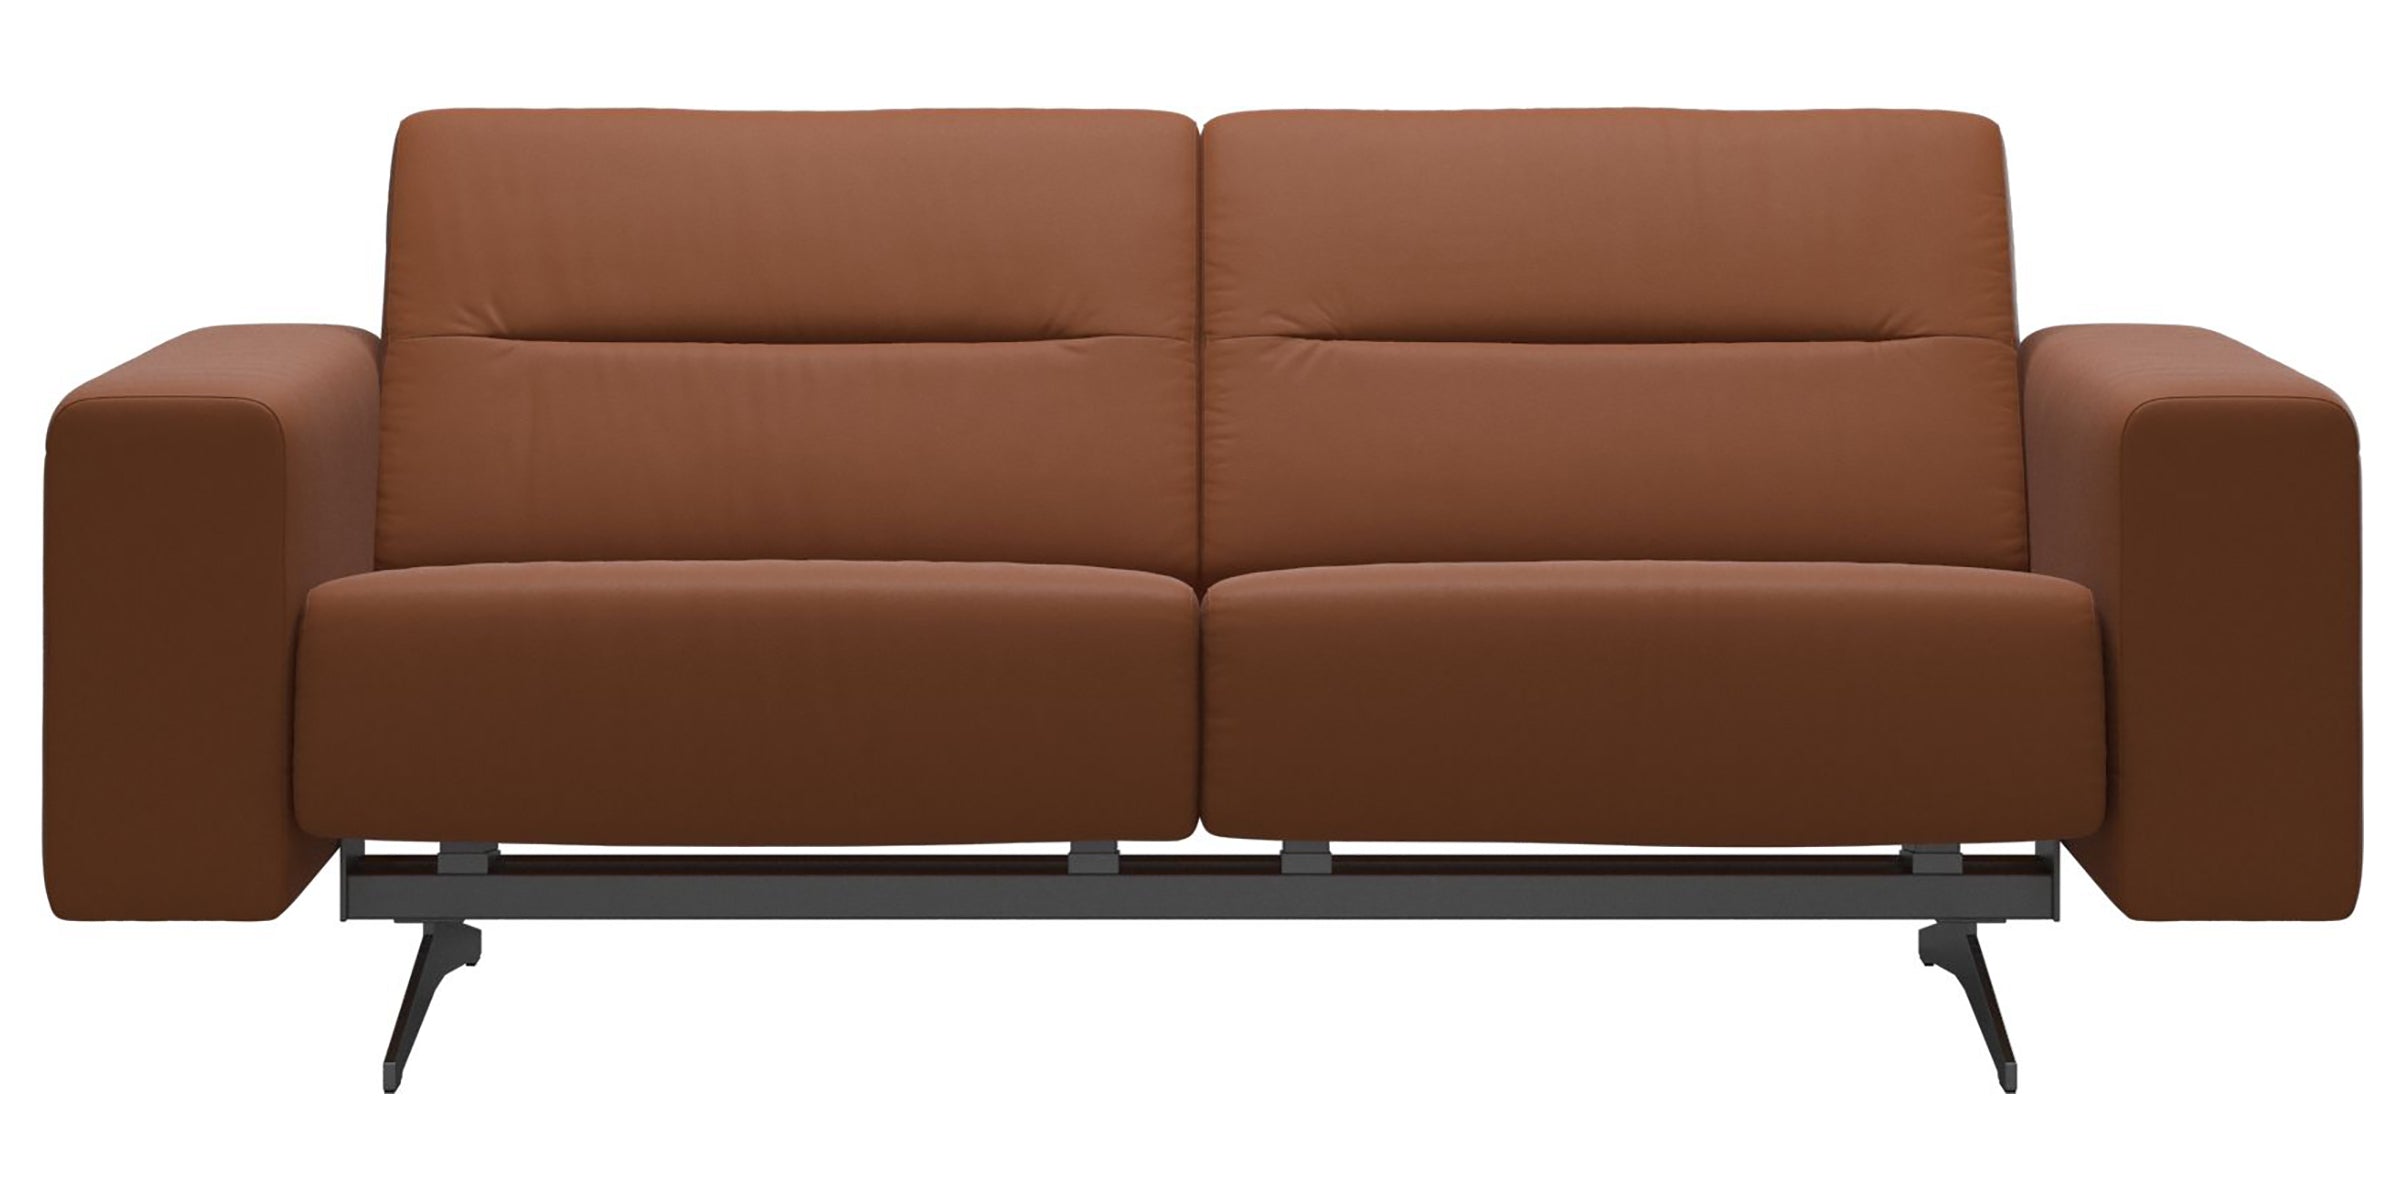 Paloma Leather New Cognac & Chrome Base | Stressless Stella 2-Seater Sofa with S1 Arm | Valley Ridge Furniture